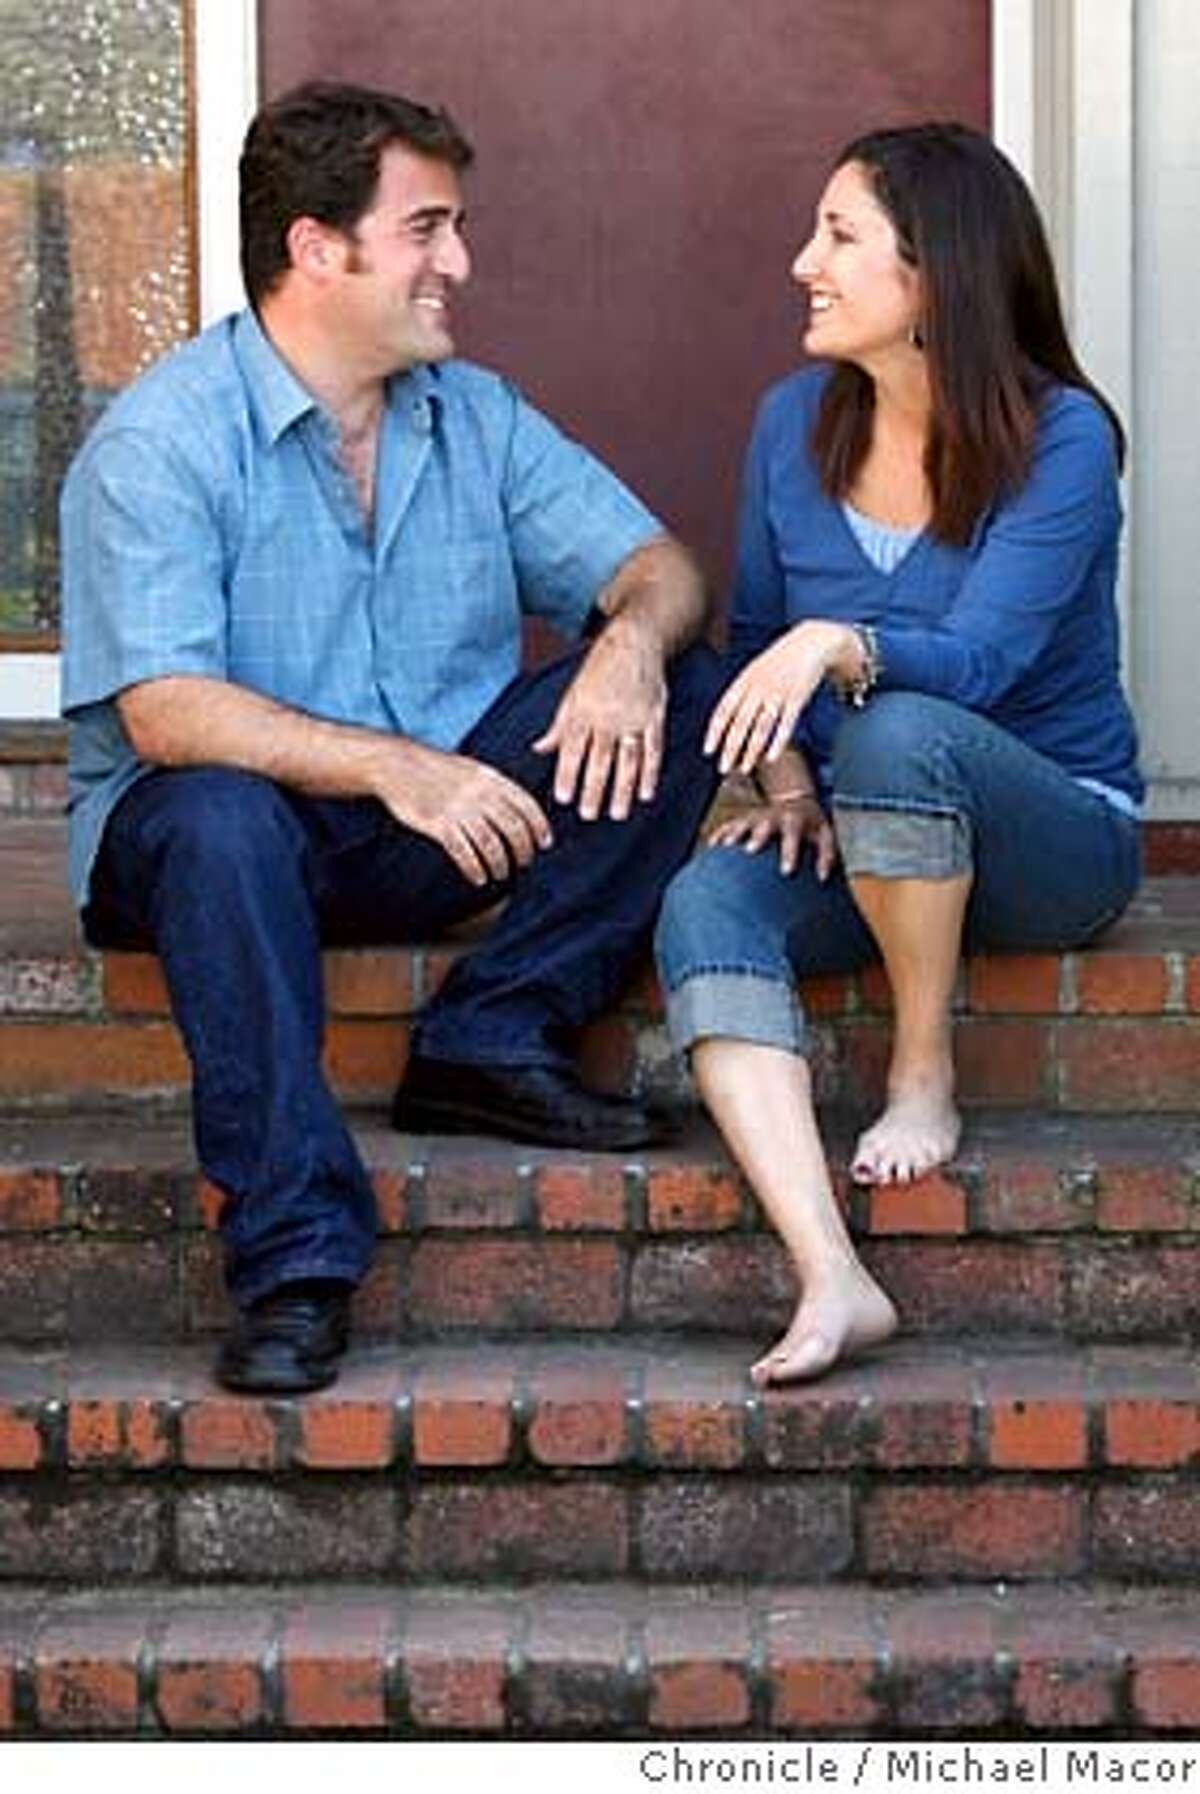 fathers17_043_mac.jpg Mel and Jessica on their front porch in Alameda. Jessica Lindsey, of Alameda says her husband, Mel Waldorf, has features very similar to her father's. Father-daughter relationships and how they affect the men that women are attracted to. Story is based on a study that came out this week, suggesting that women who had good relationships with their fathers tend to be atttracted to men who look similar to their fathers. Photographed in, Alameda, Ca, on 6/15/07. Photo by: Michael Macor/ The Chronicle Mandatory credit for Photographer and San Francisco Chronicle No sales/ Magazines Out